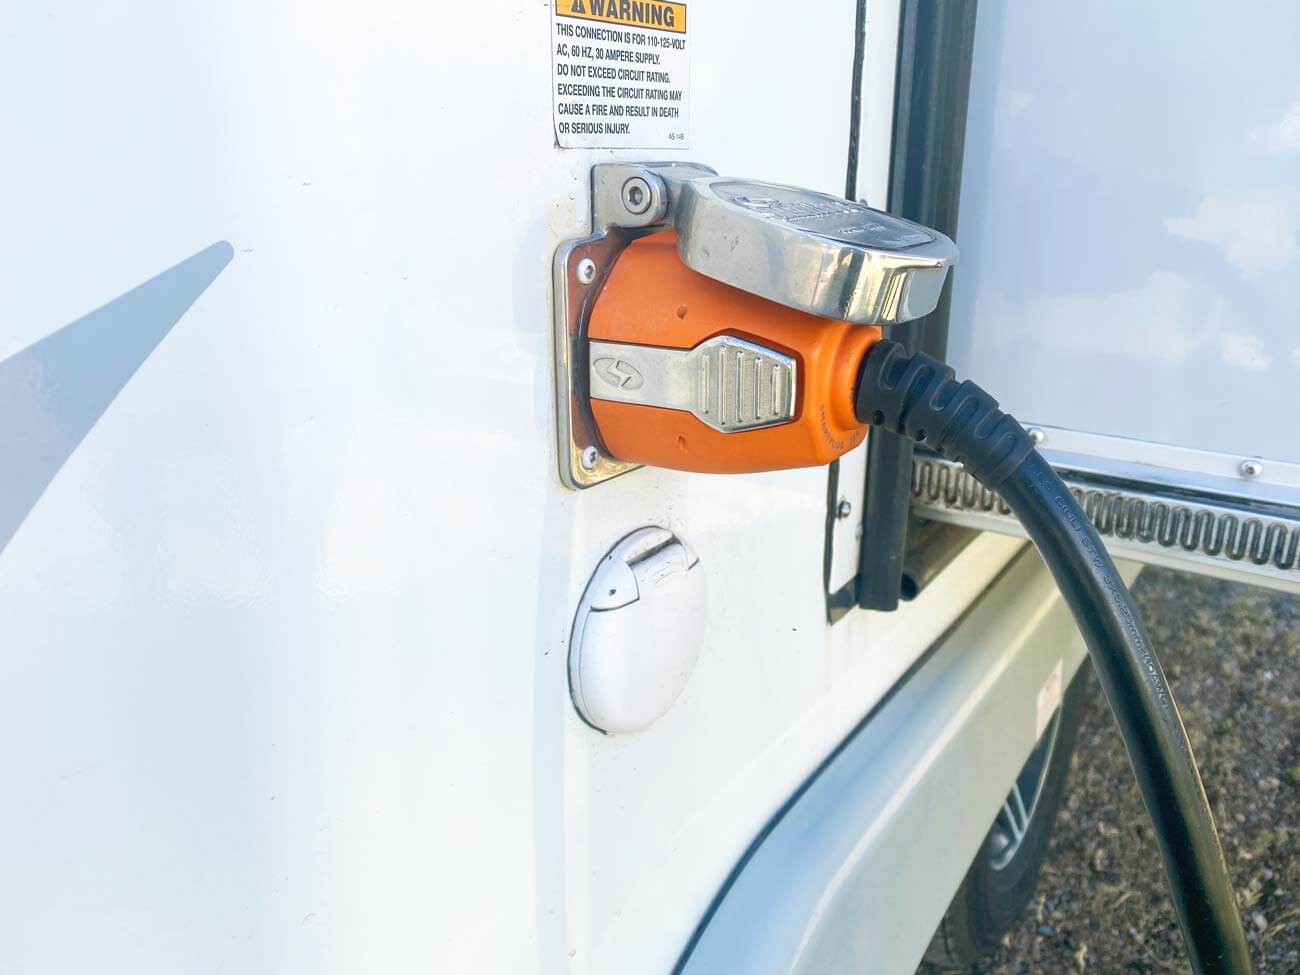 RV power cord plugged into RV shore power outlet.